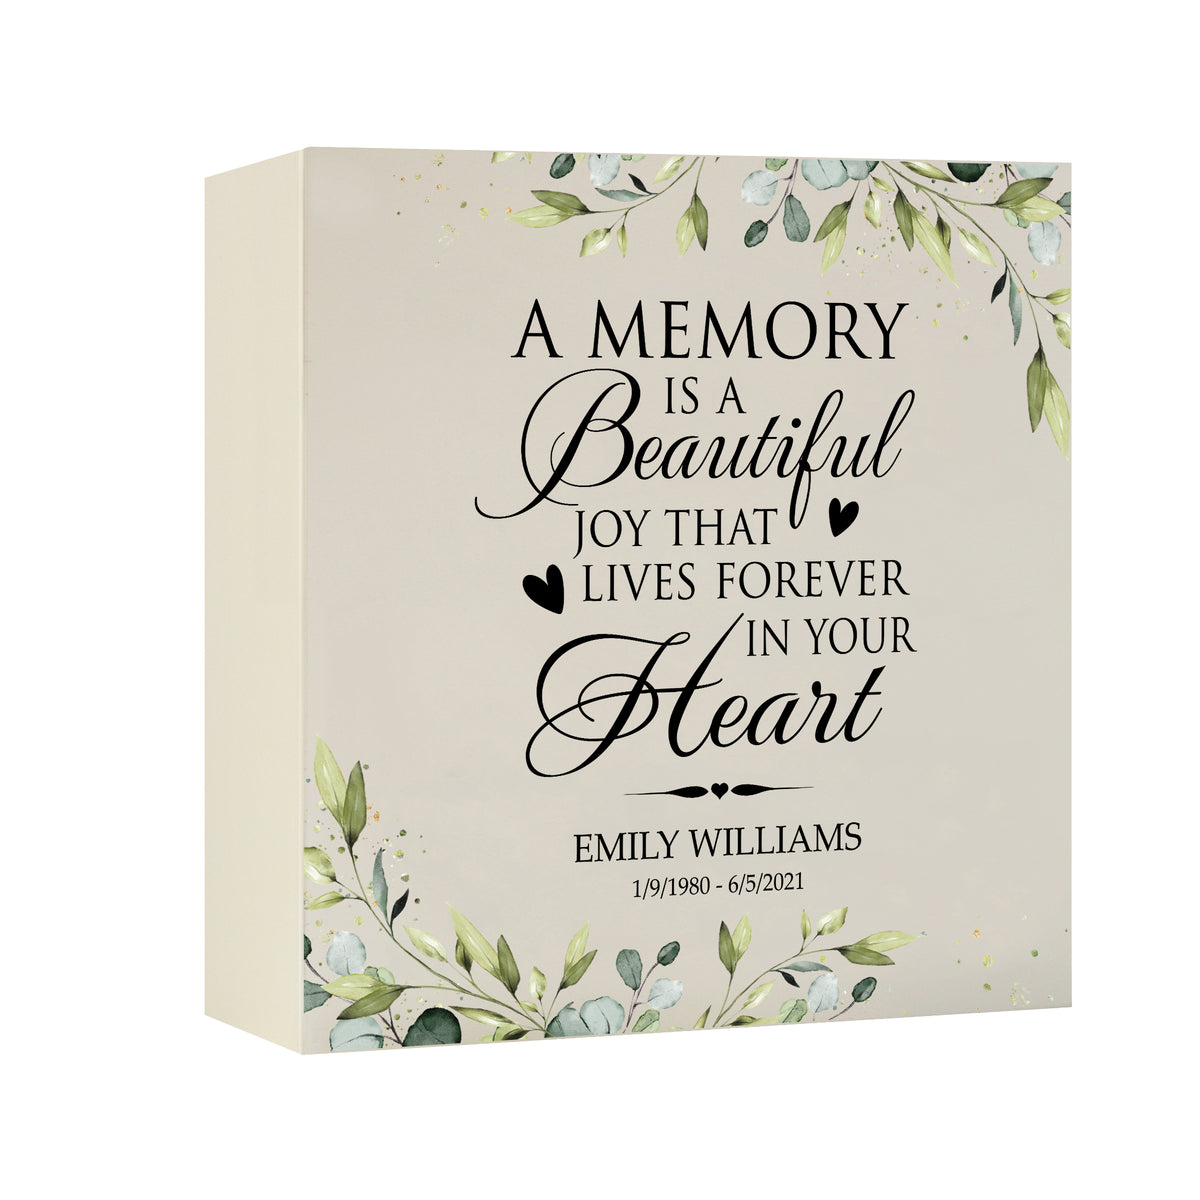 Timeless Human Memorial Shadow Box Urn With Inspirational Verse in Ivory - A Memory Is A Beautiful Joy